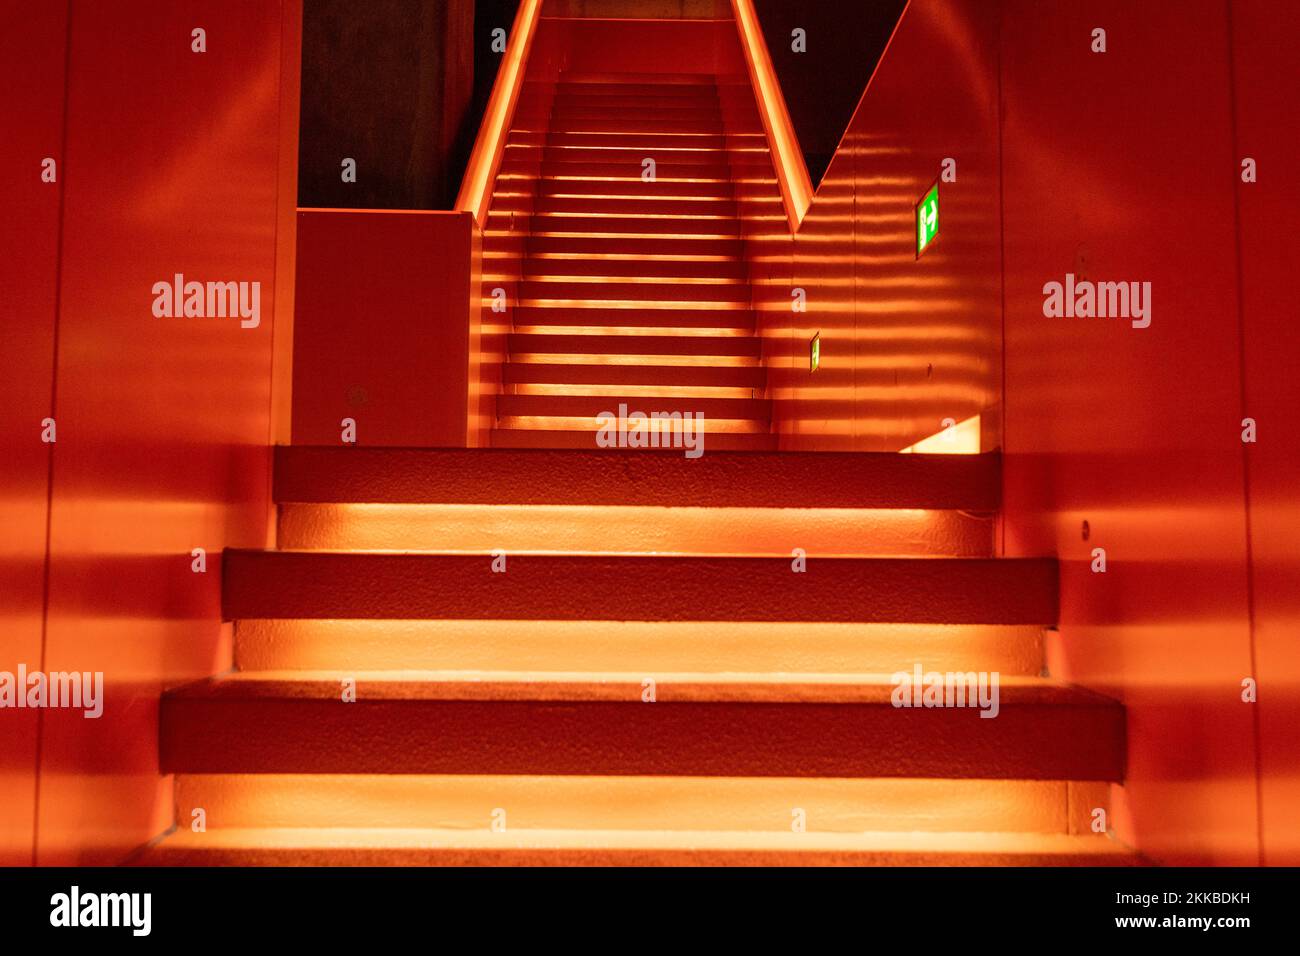 Essen, Germany - July 23, 2019:  Interior view of beautiful orange illuminated remarkable staircase is located at the entrance of Ruhr museum at Zeche Stock Photo